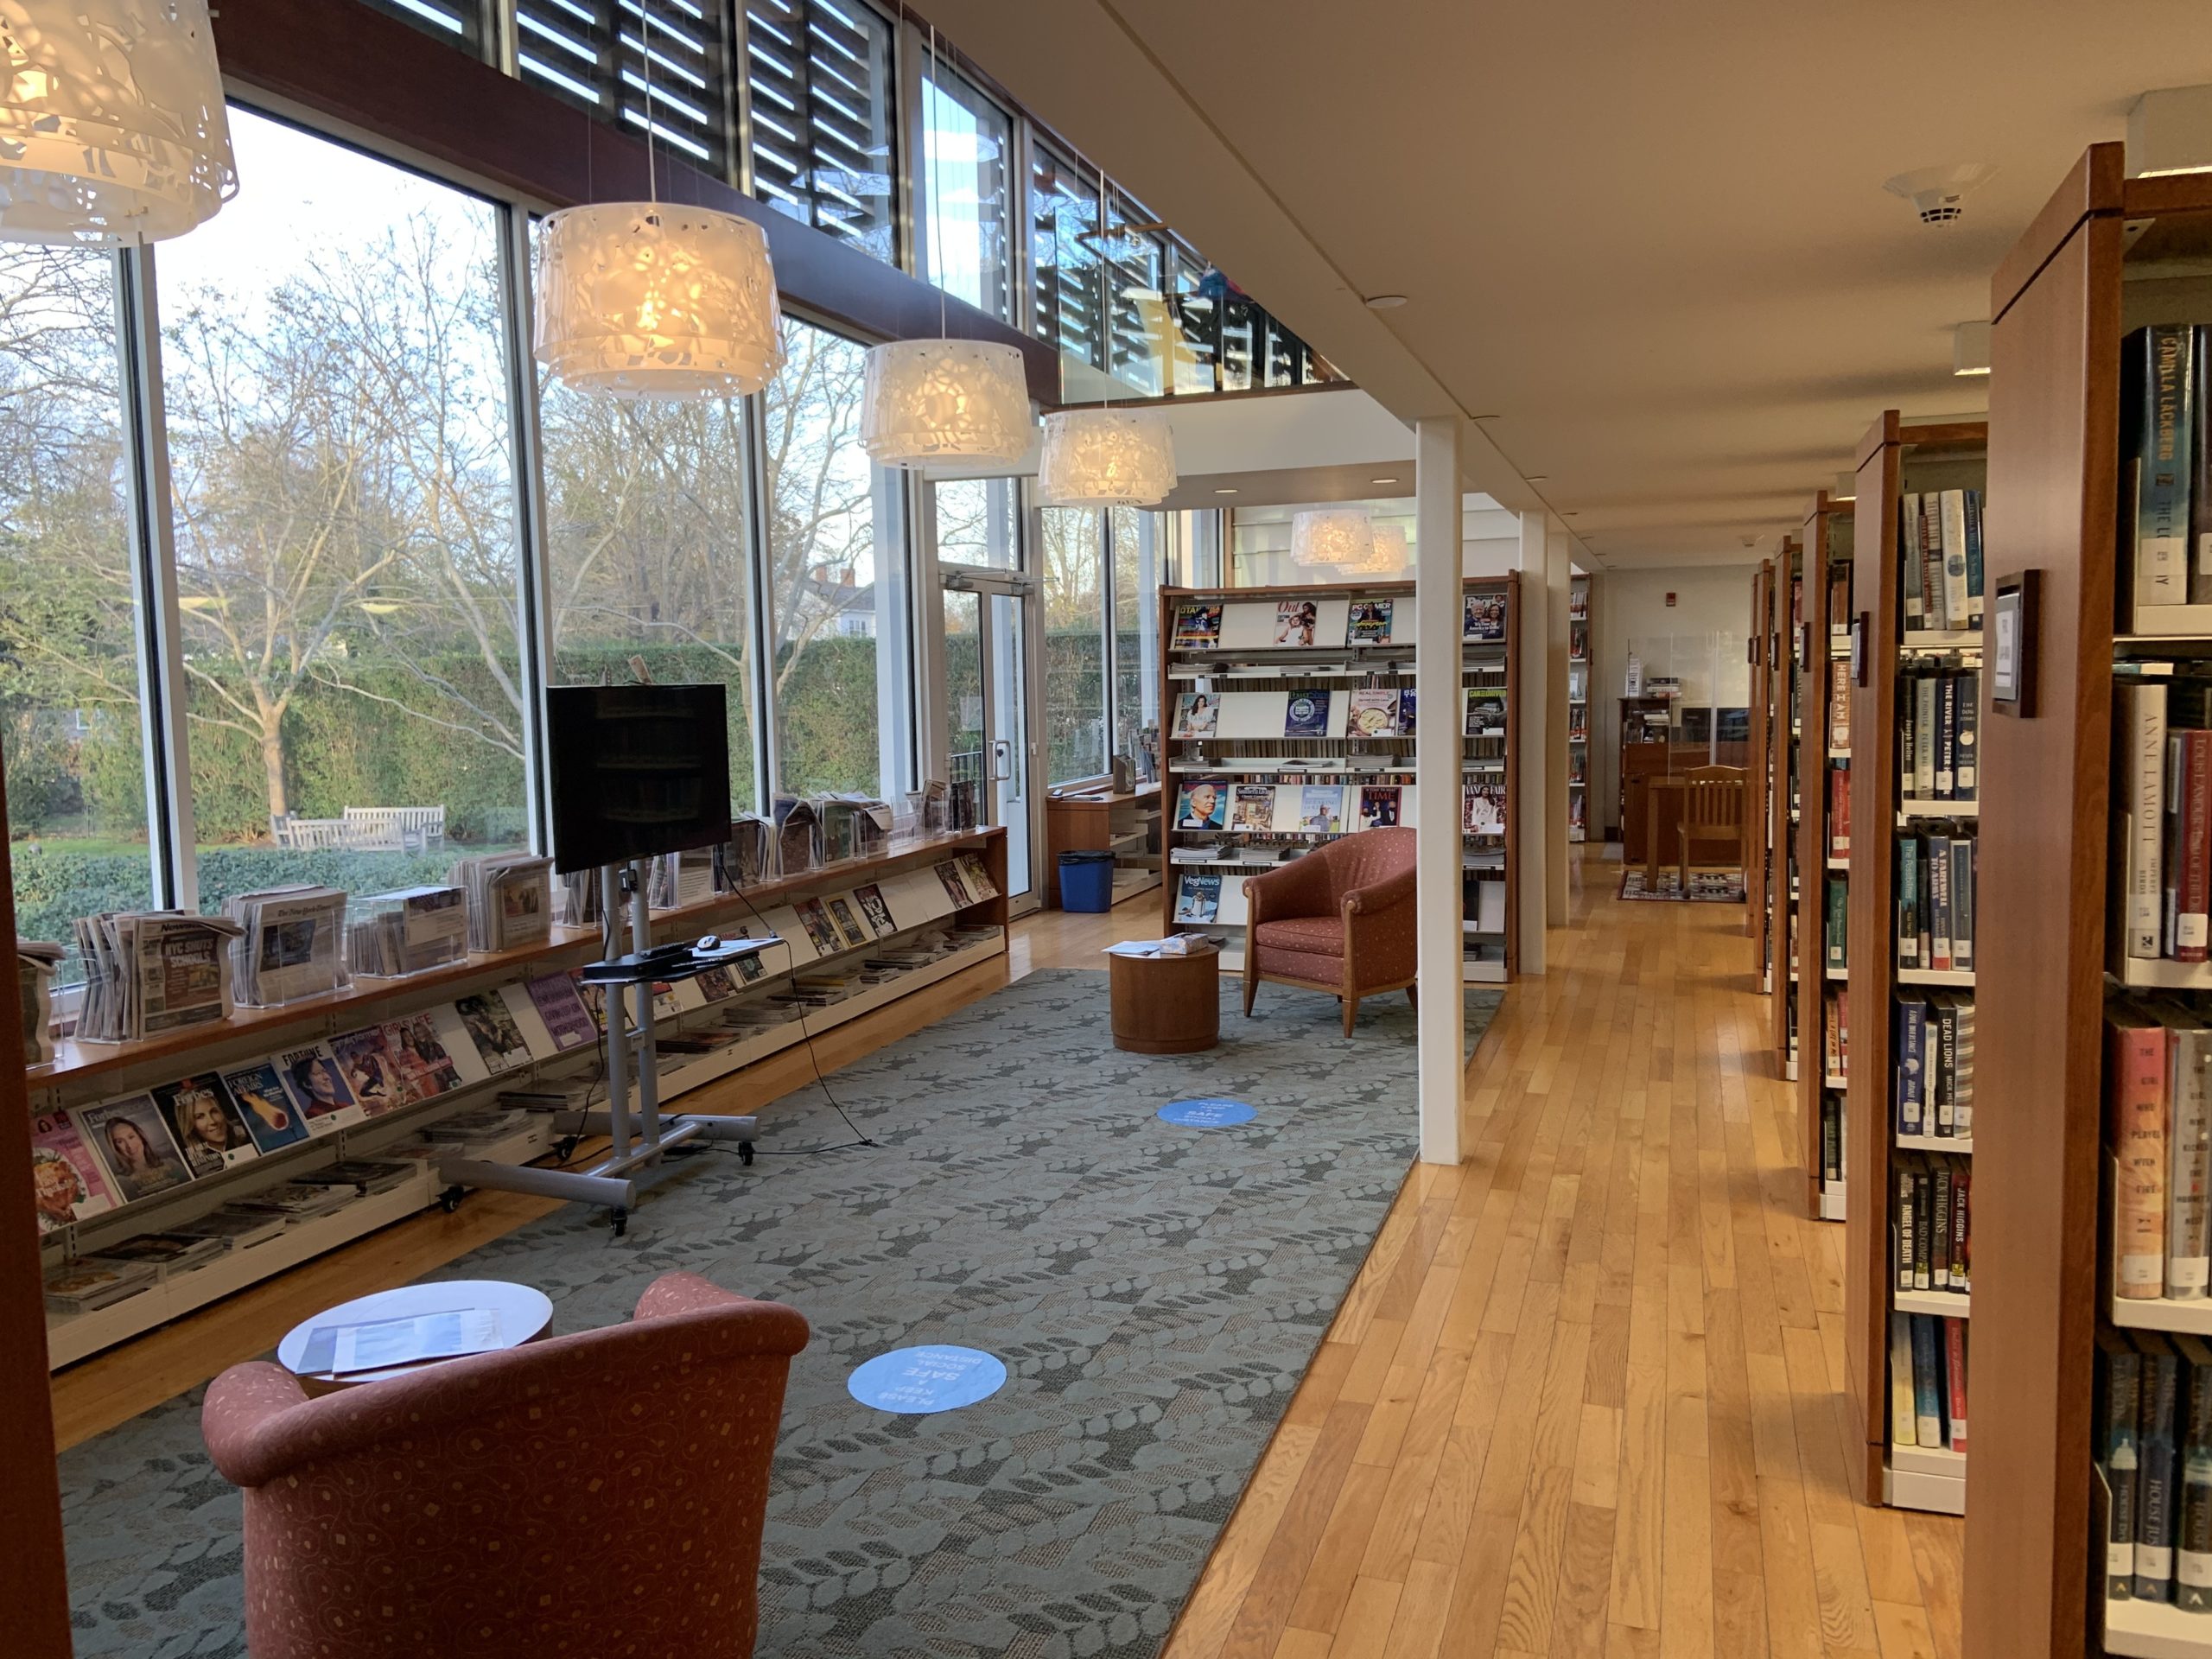 The reading area, with large windows overlooking the back lawn, will remain as is when the Hampton Library undertakes a renovation. STEPHEN J. KOTZ